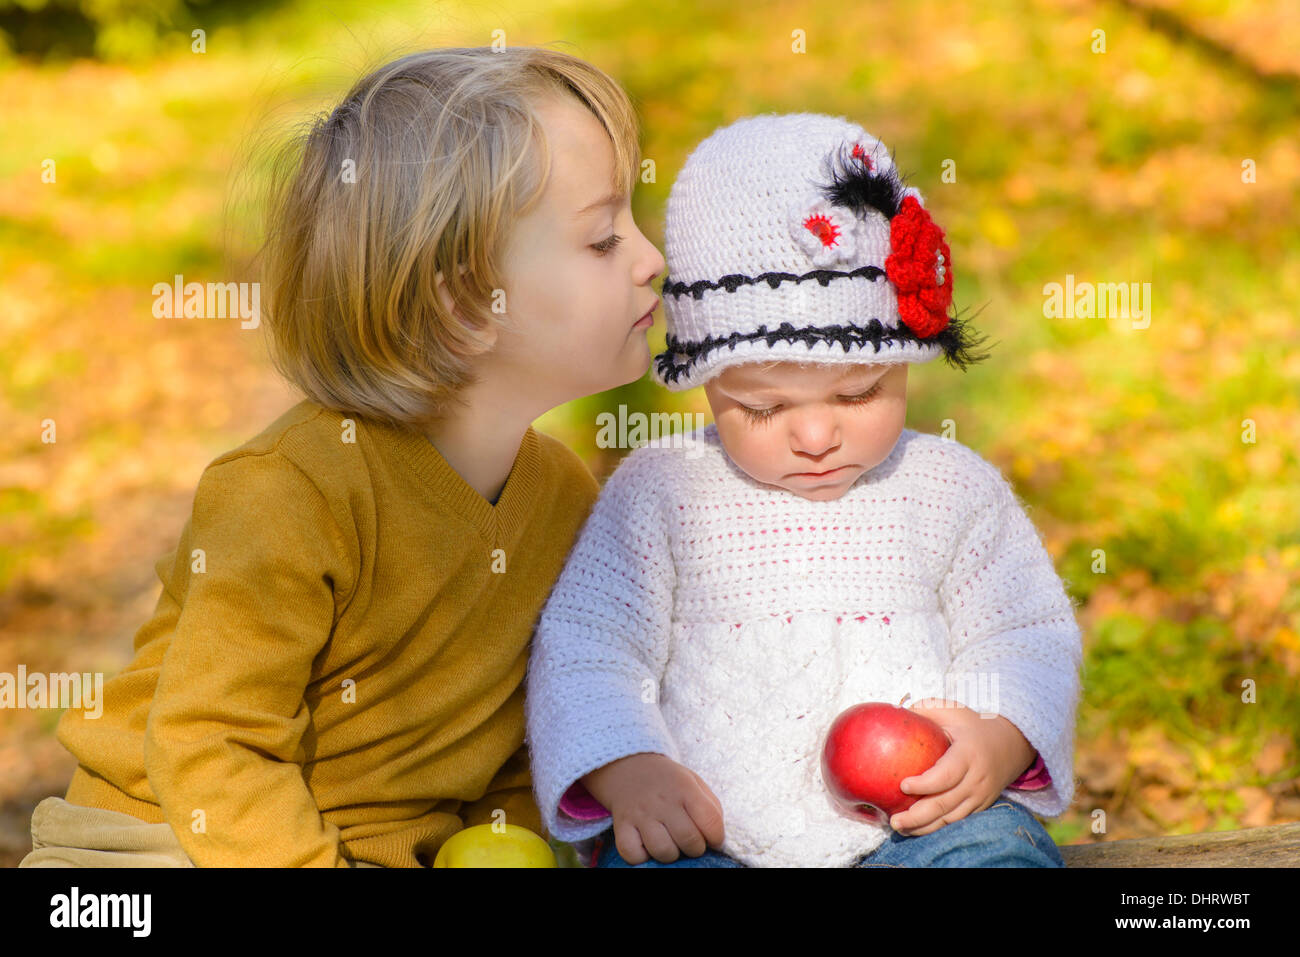 A boy whispering to a girl in a autumn sunlight Stock Photo